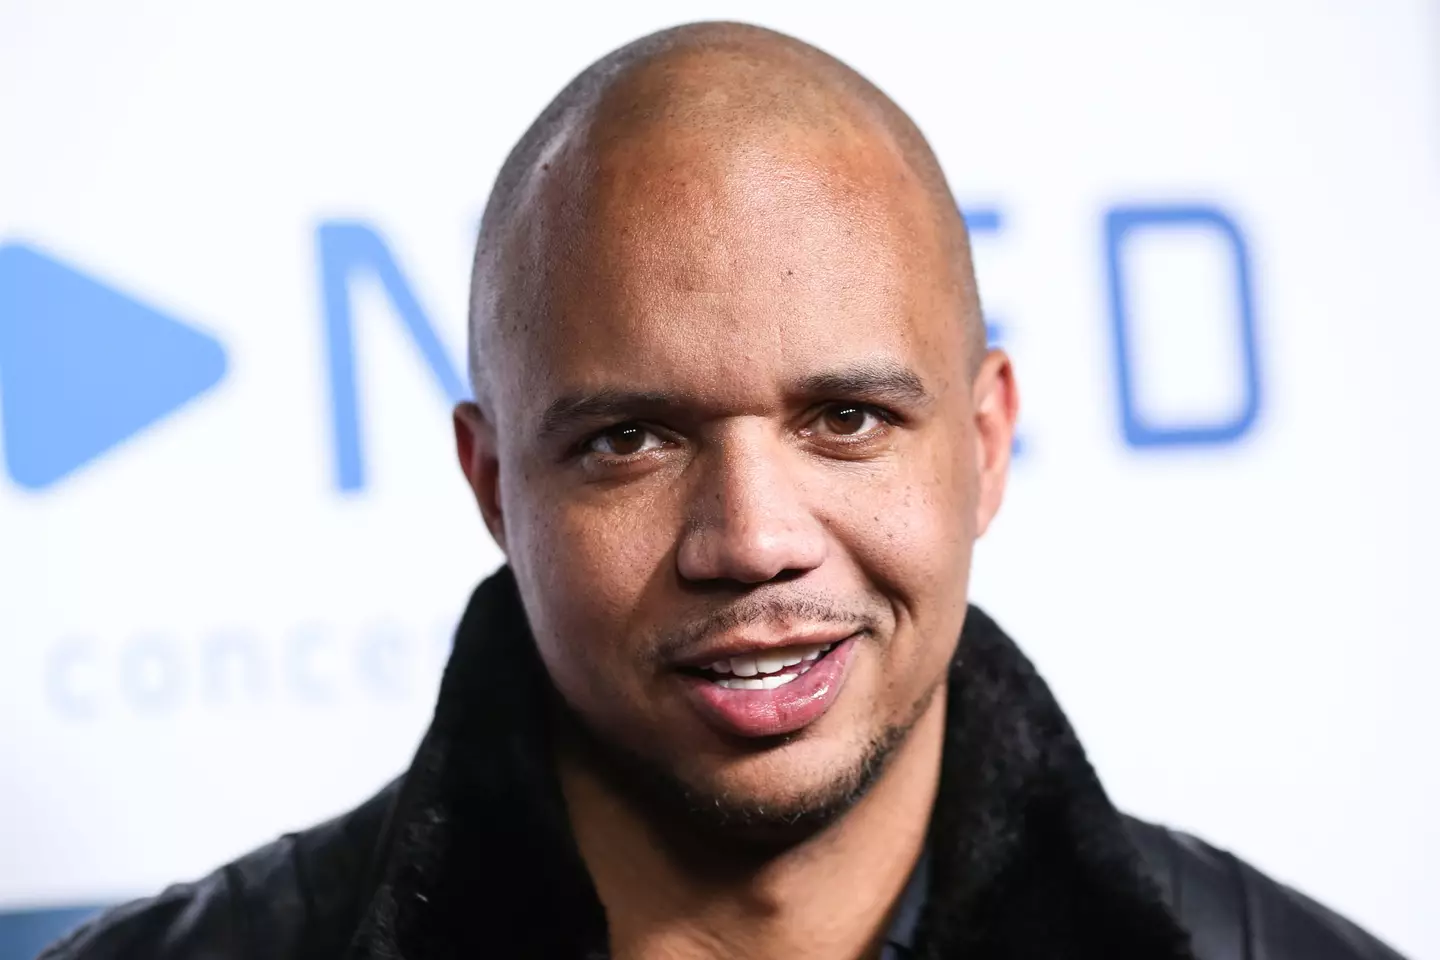 Phil Ivey has weighed in on whether or not he thinks Lew cheated.